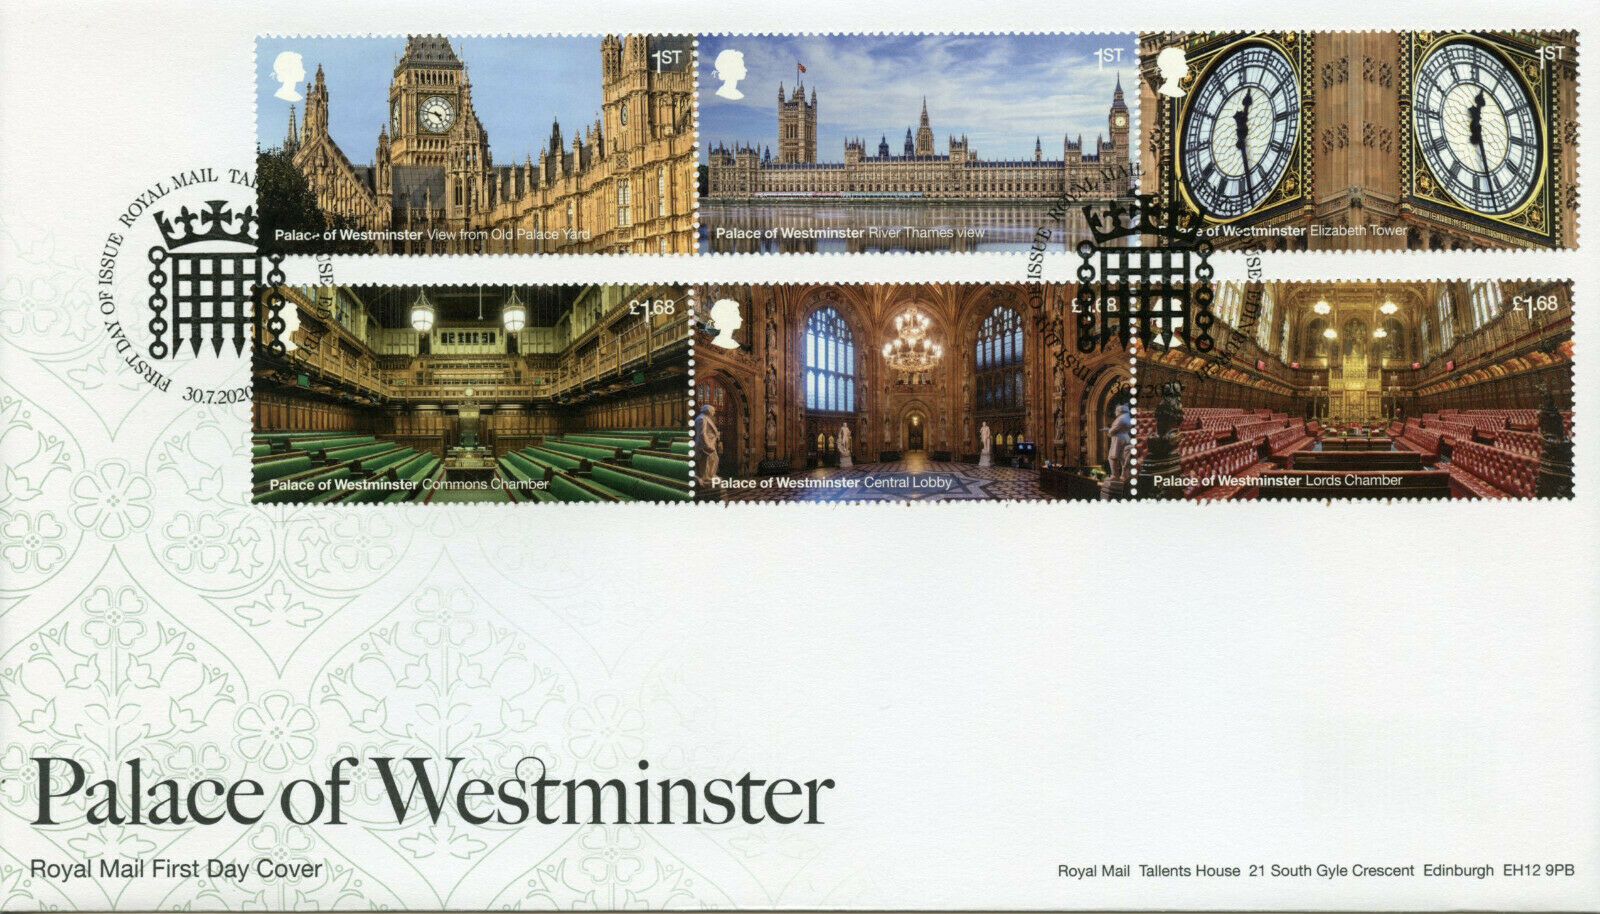 GB Architecture Stamps 2020 FDC Palace of Westminster Big Ben 6v Set in 2 Strips